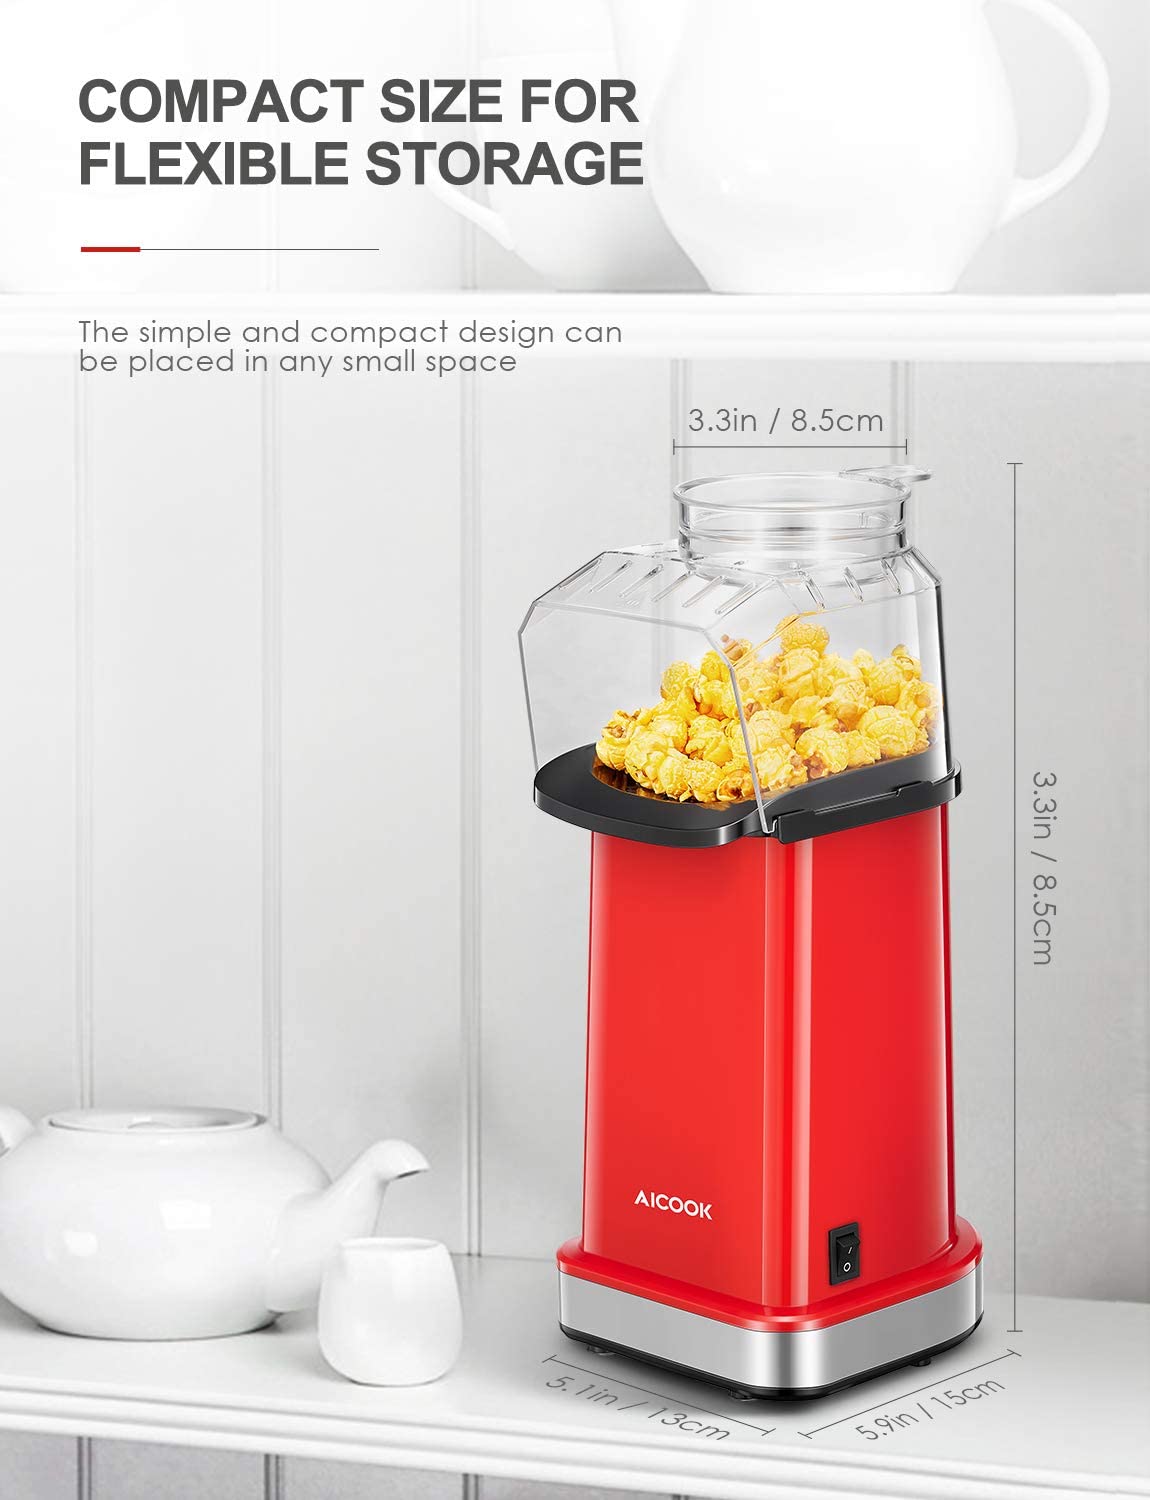 AICOOK | Hot Air Popcorn Popper, 1400W Home Popcorn Maker with Measuring Cup & Removable Lid, 3 Minutes Fast, Compact Size For Flexible Storage, Healthy Oil-Free & BPA-Free, Red